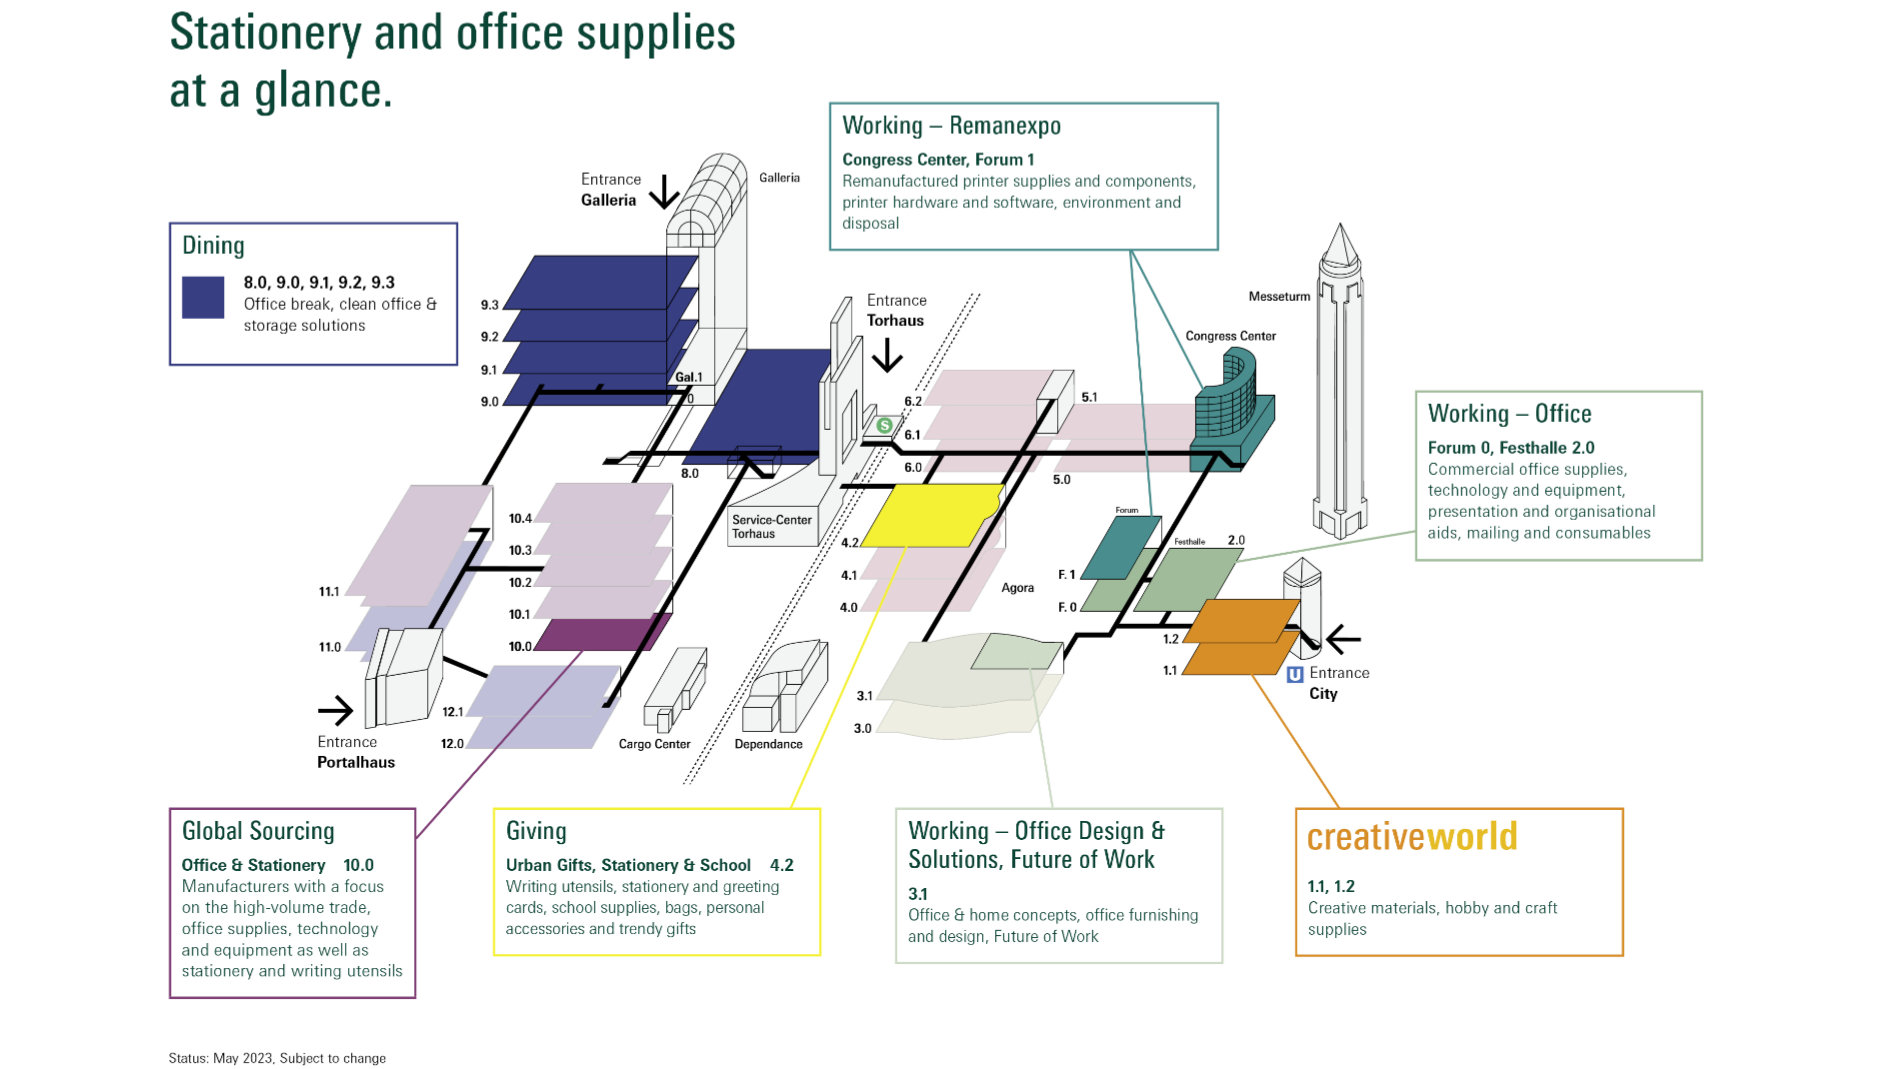 Fairground plan: Stationery and office supllies at a glance